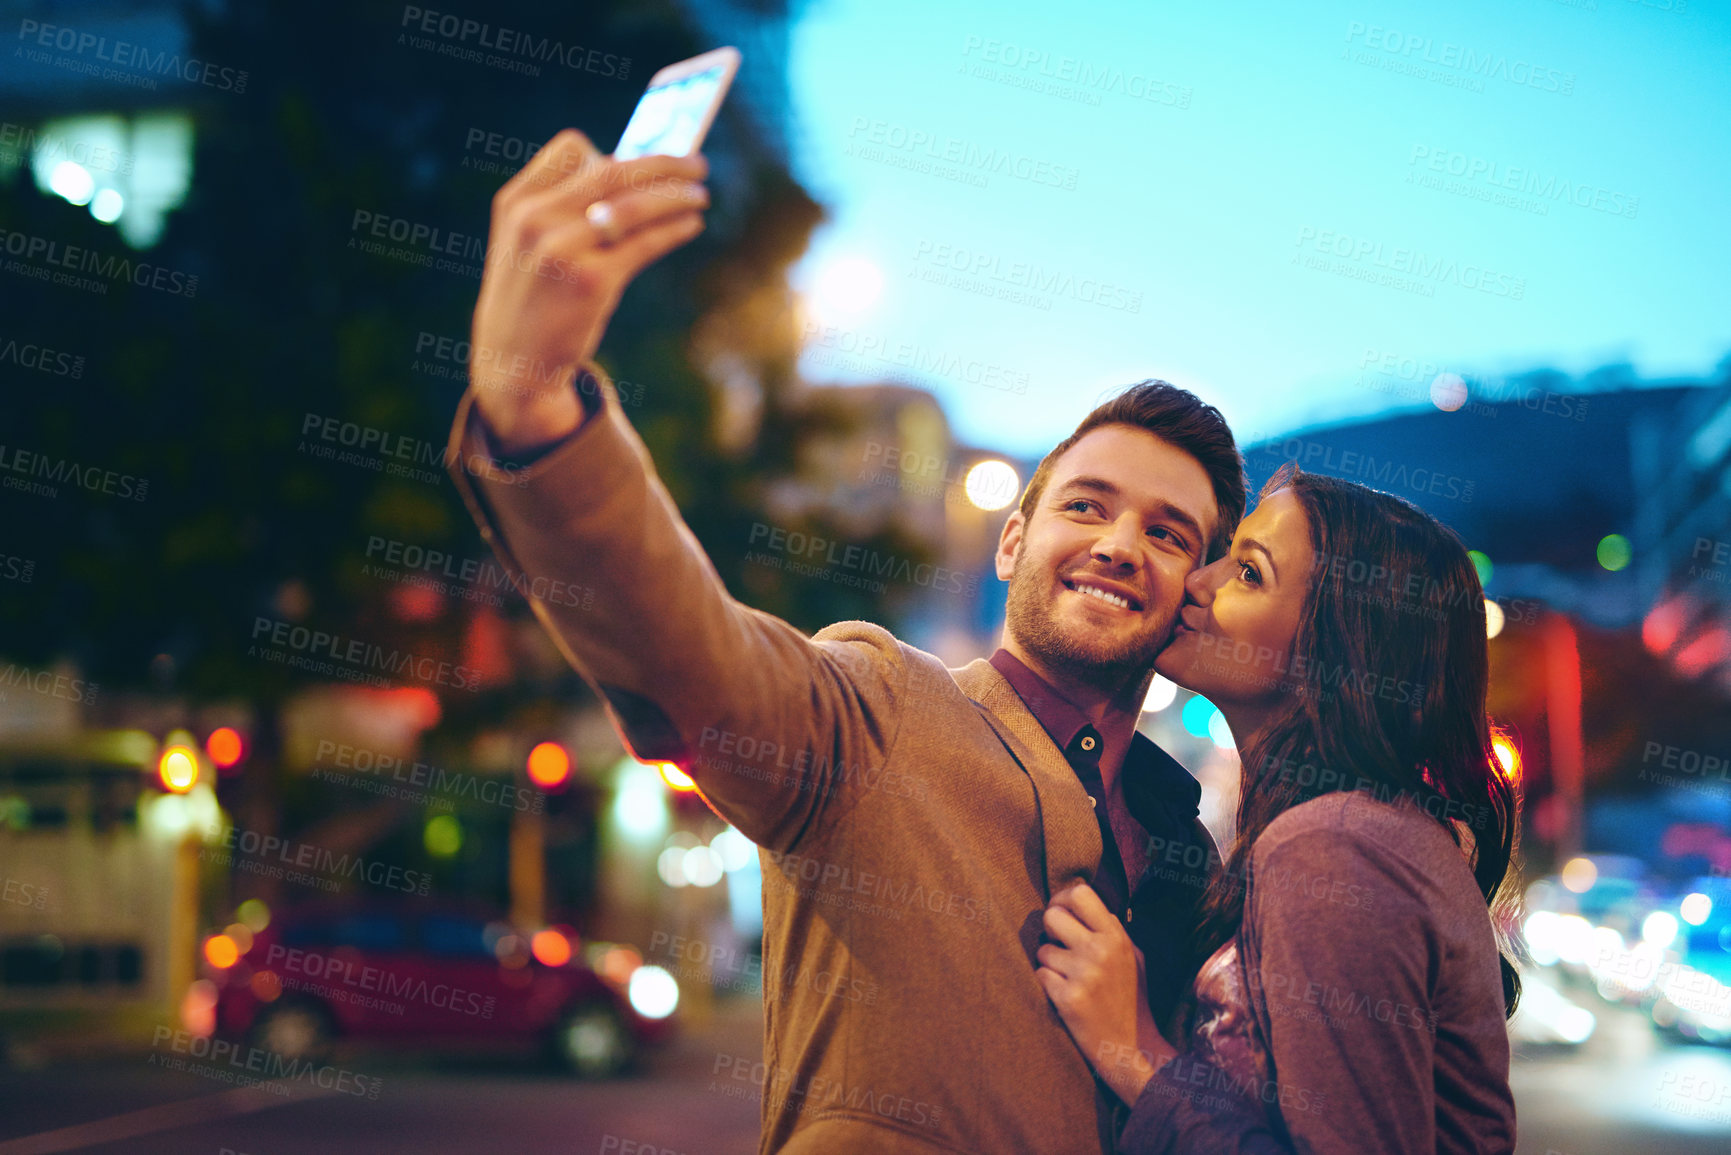 Buy stock photo Cropped shot of an affectionate young couple taking selfies while out on a date in the city